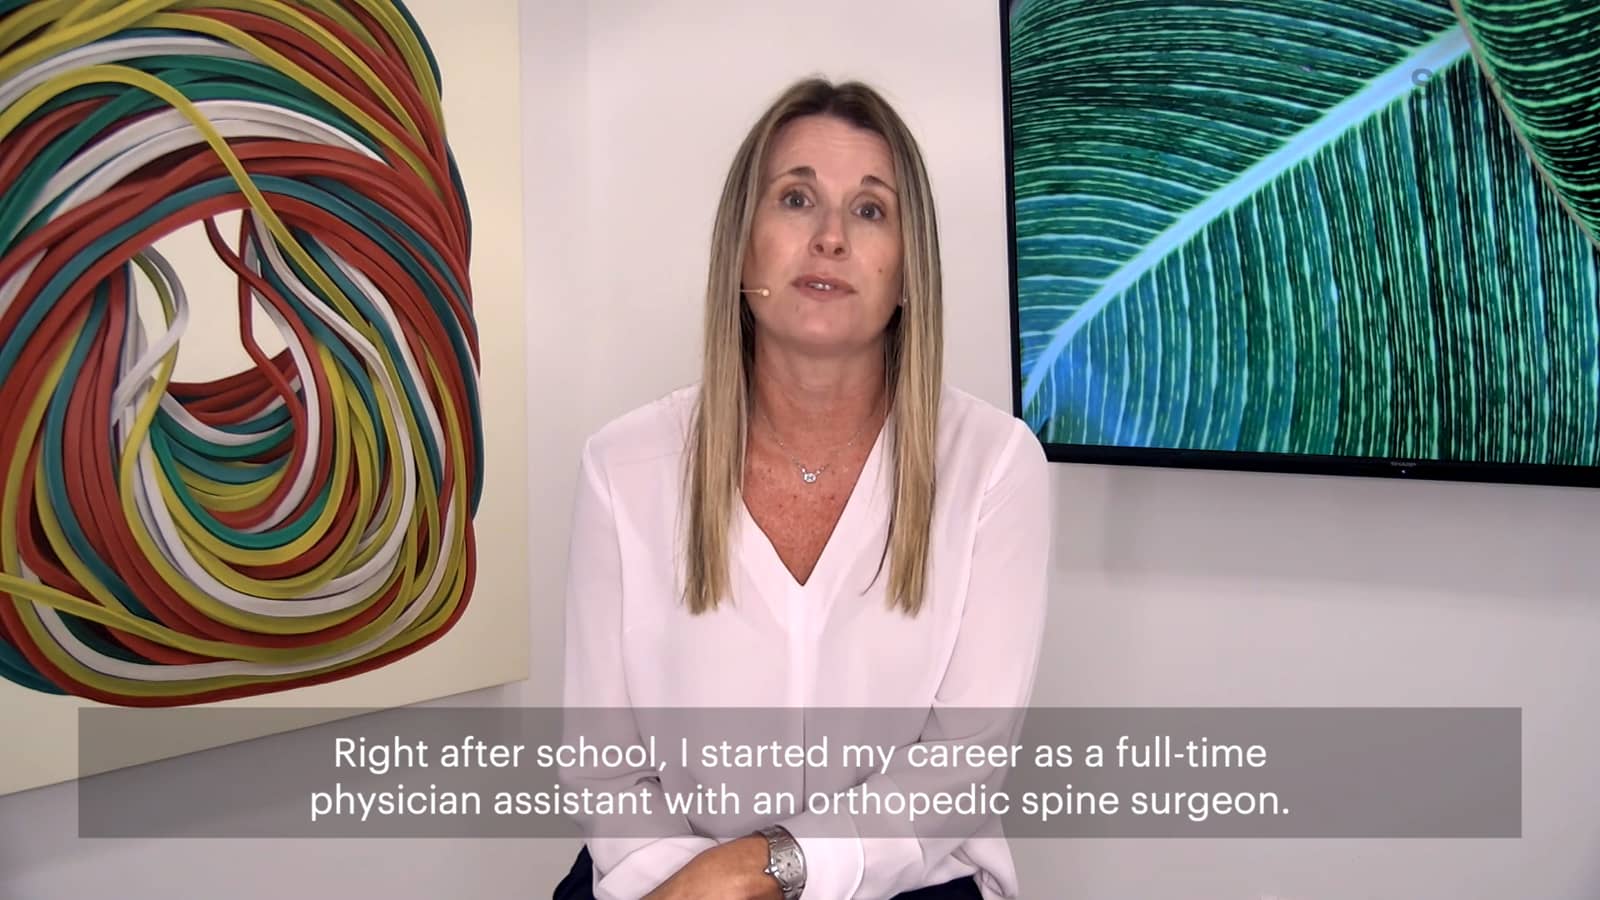 Learn how Melissa Seits, PA-C transitioned from Orthopedics to Aesthetics.